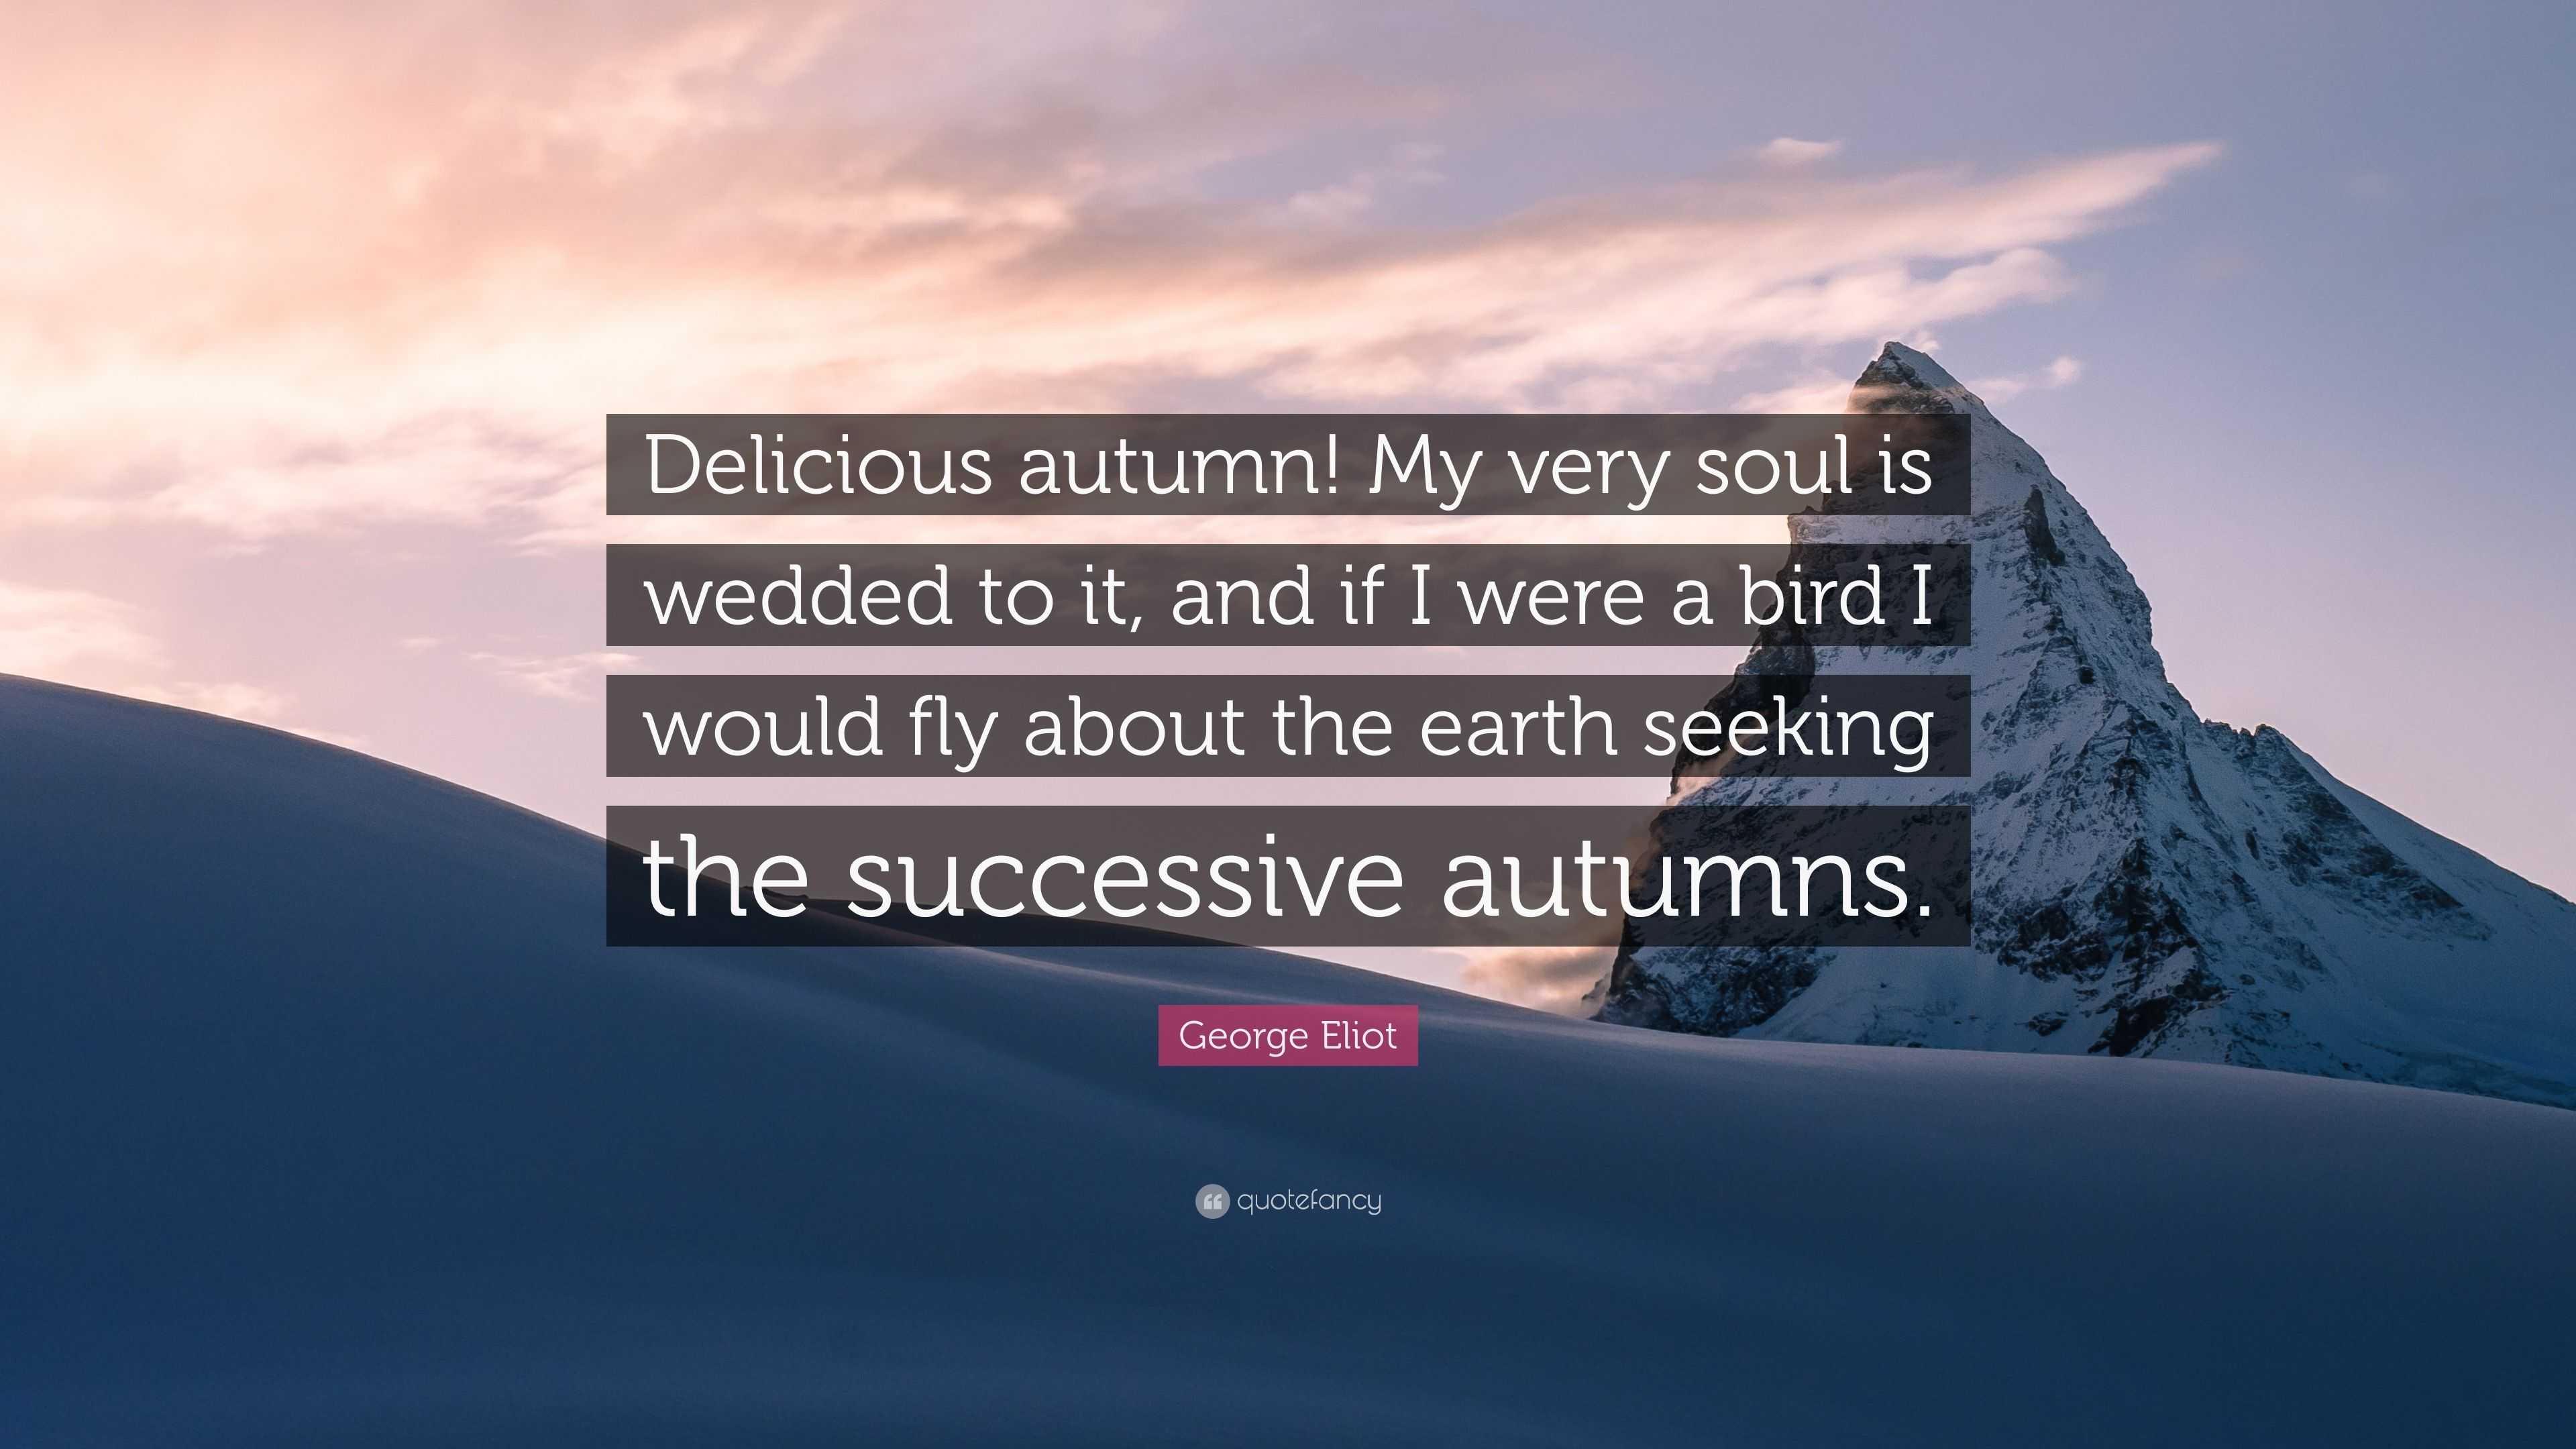 FALL GUY - Idiom of the day by Reverso! #englishidioms